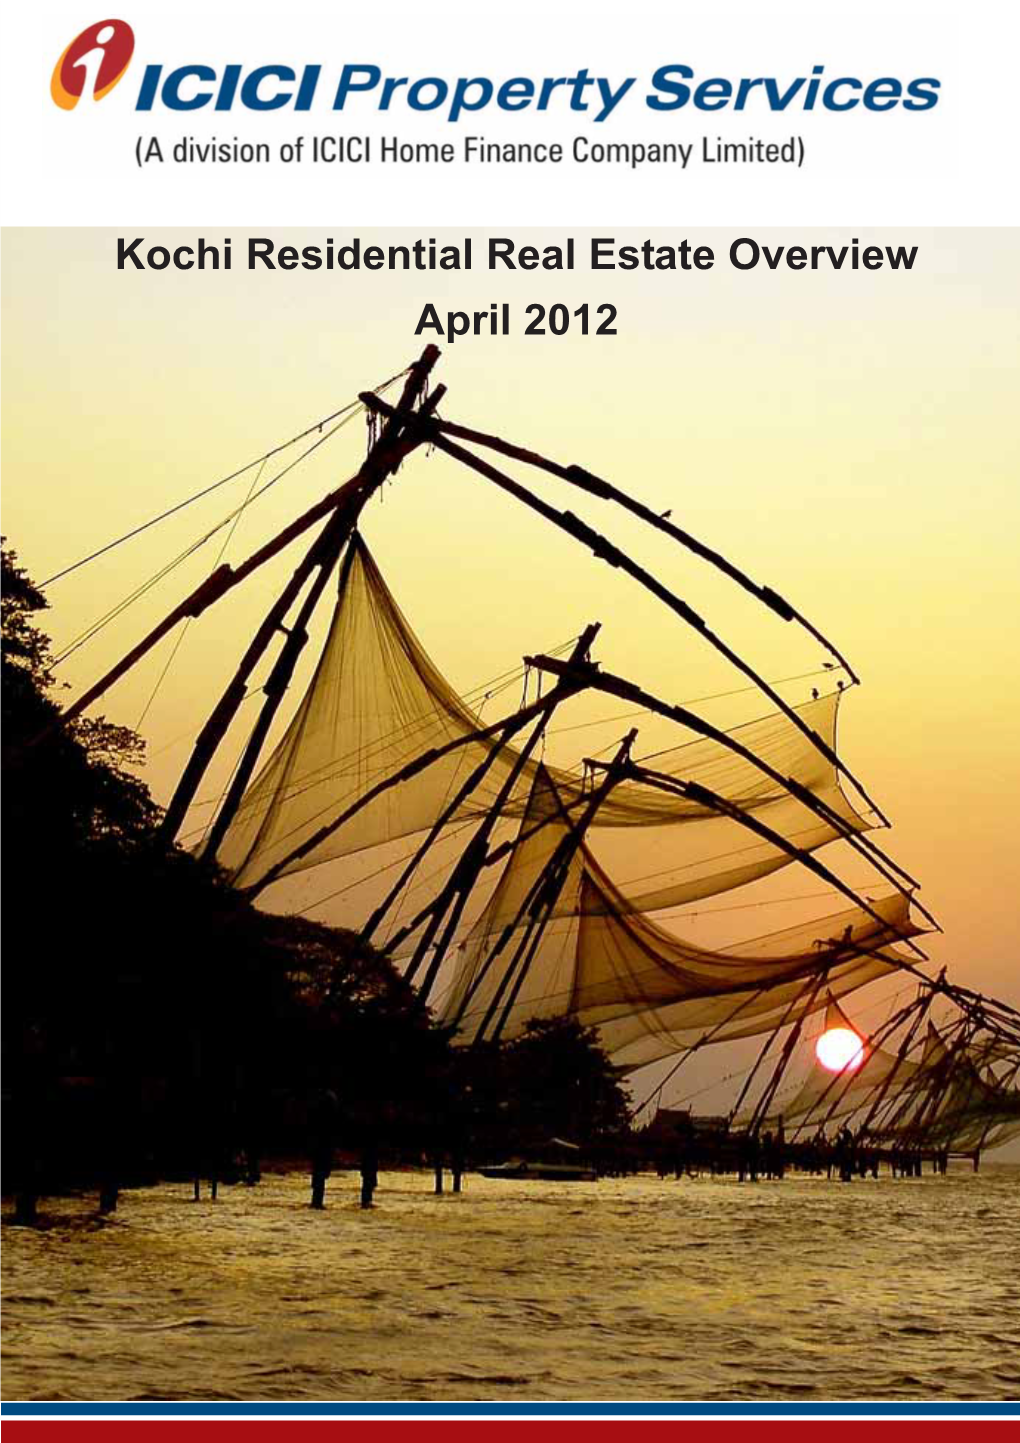 Kochi Residential Real Estate Overview April 2012 TABLE of CONTENTS